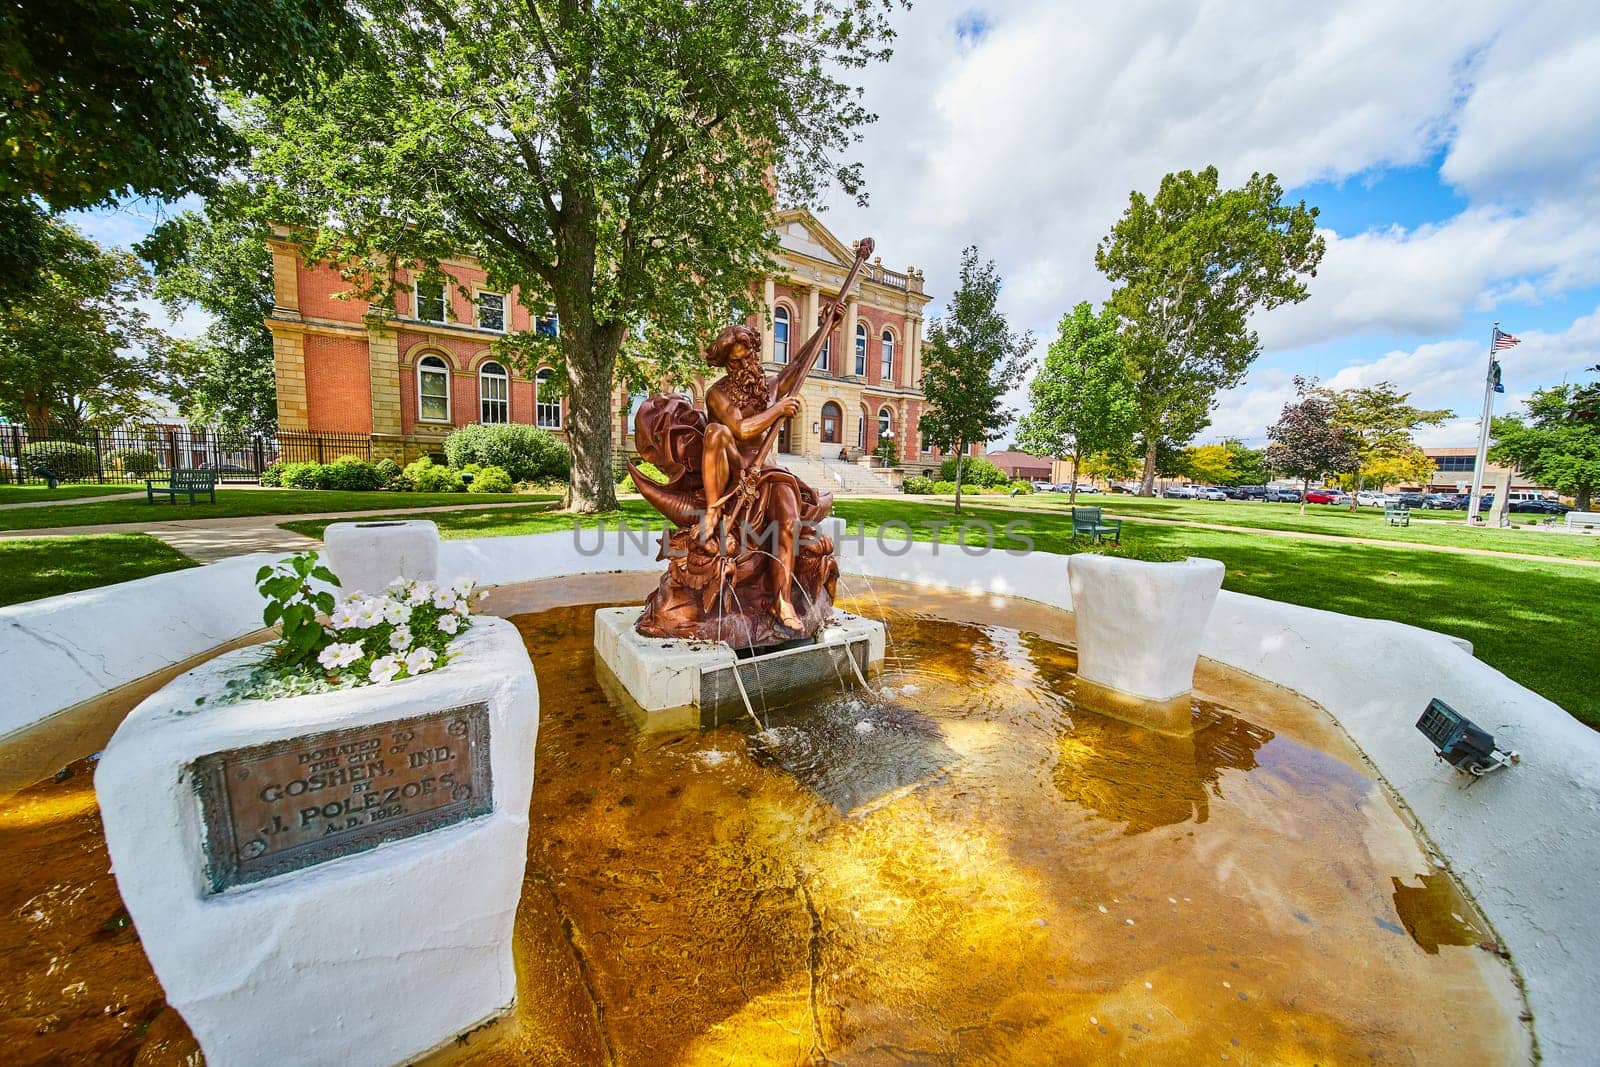 Poseidon bronze statue in golden yellow water fountain in front of Elkhart County courthouse, summer by njproductions